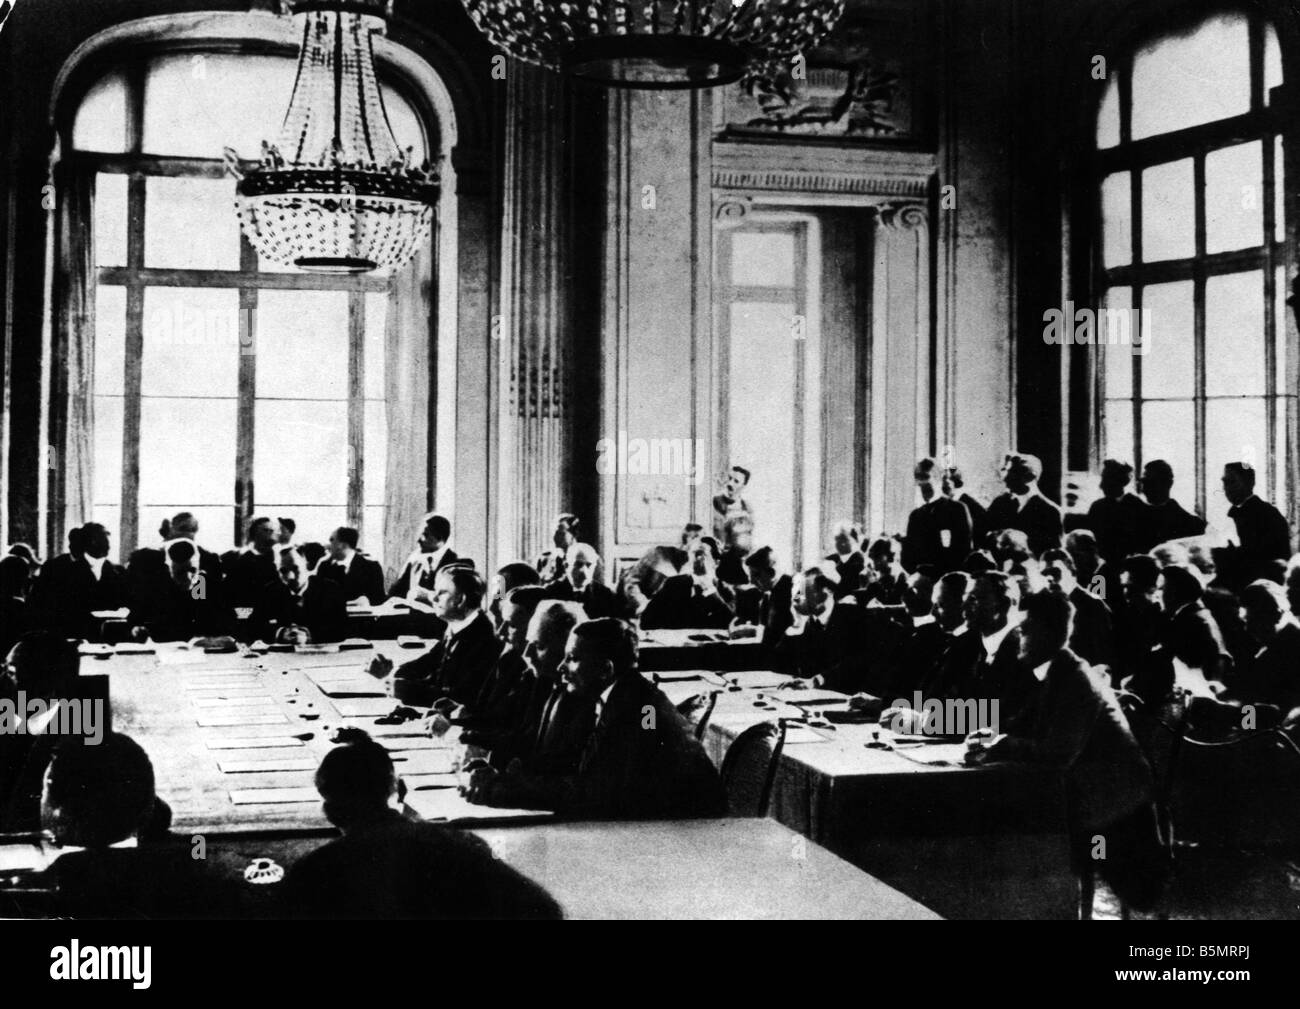 9 1919 6 28 A1 11 Hotel Trianon Conference Photo Paris Peace Conference 18 June 1919 utnil the completion of the Versailles Trea Stock Photo